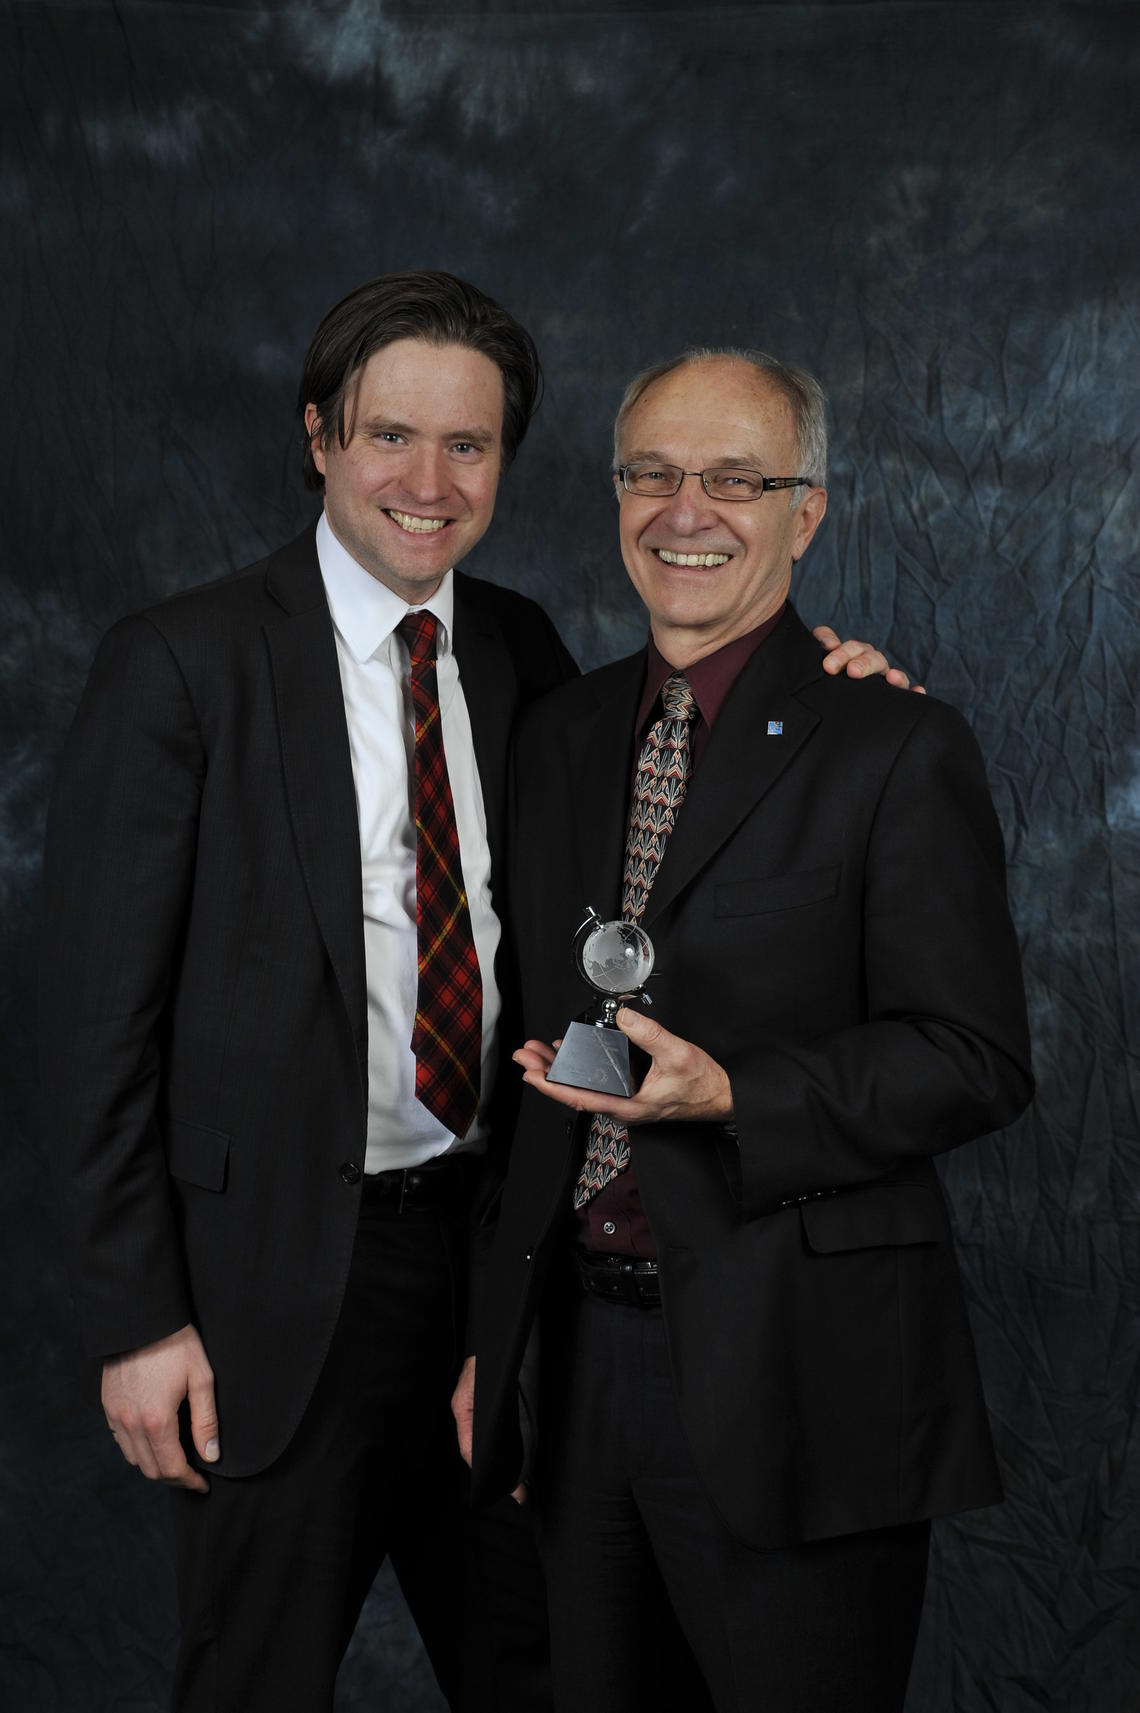 Bill Rosehart, interim dean of the Schulich School of Engineering (left) with Norman Webster, Principal at the Calgary Office of Read Jones Christoffersen Consulting Engineers, recipient of the Distinguished Collaborator Award.